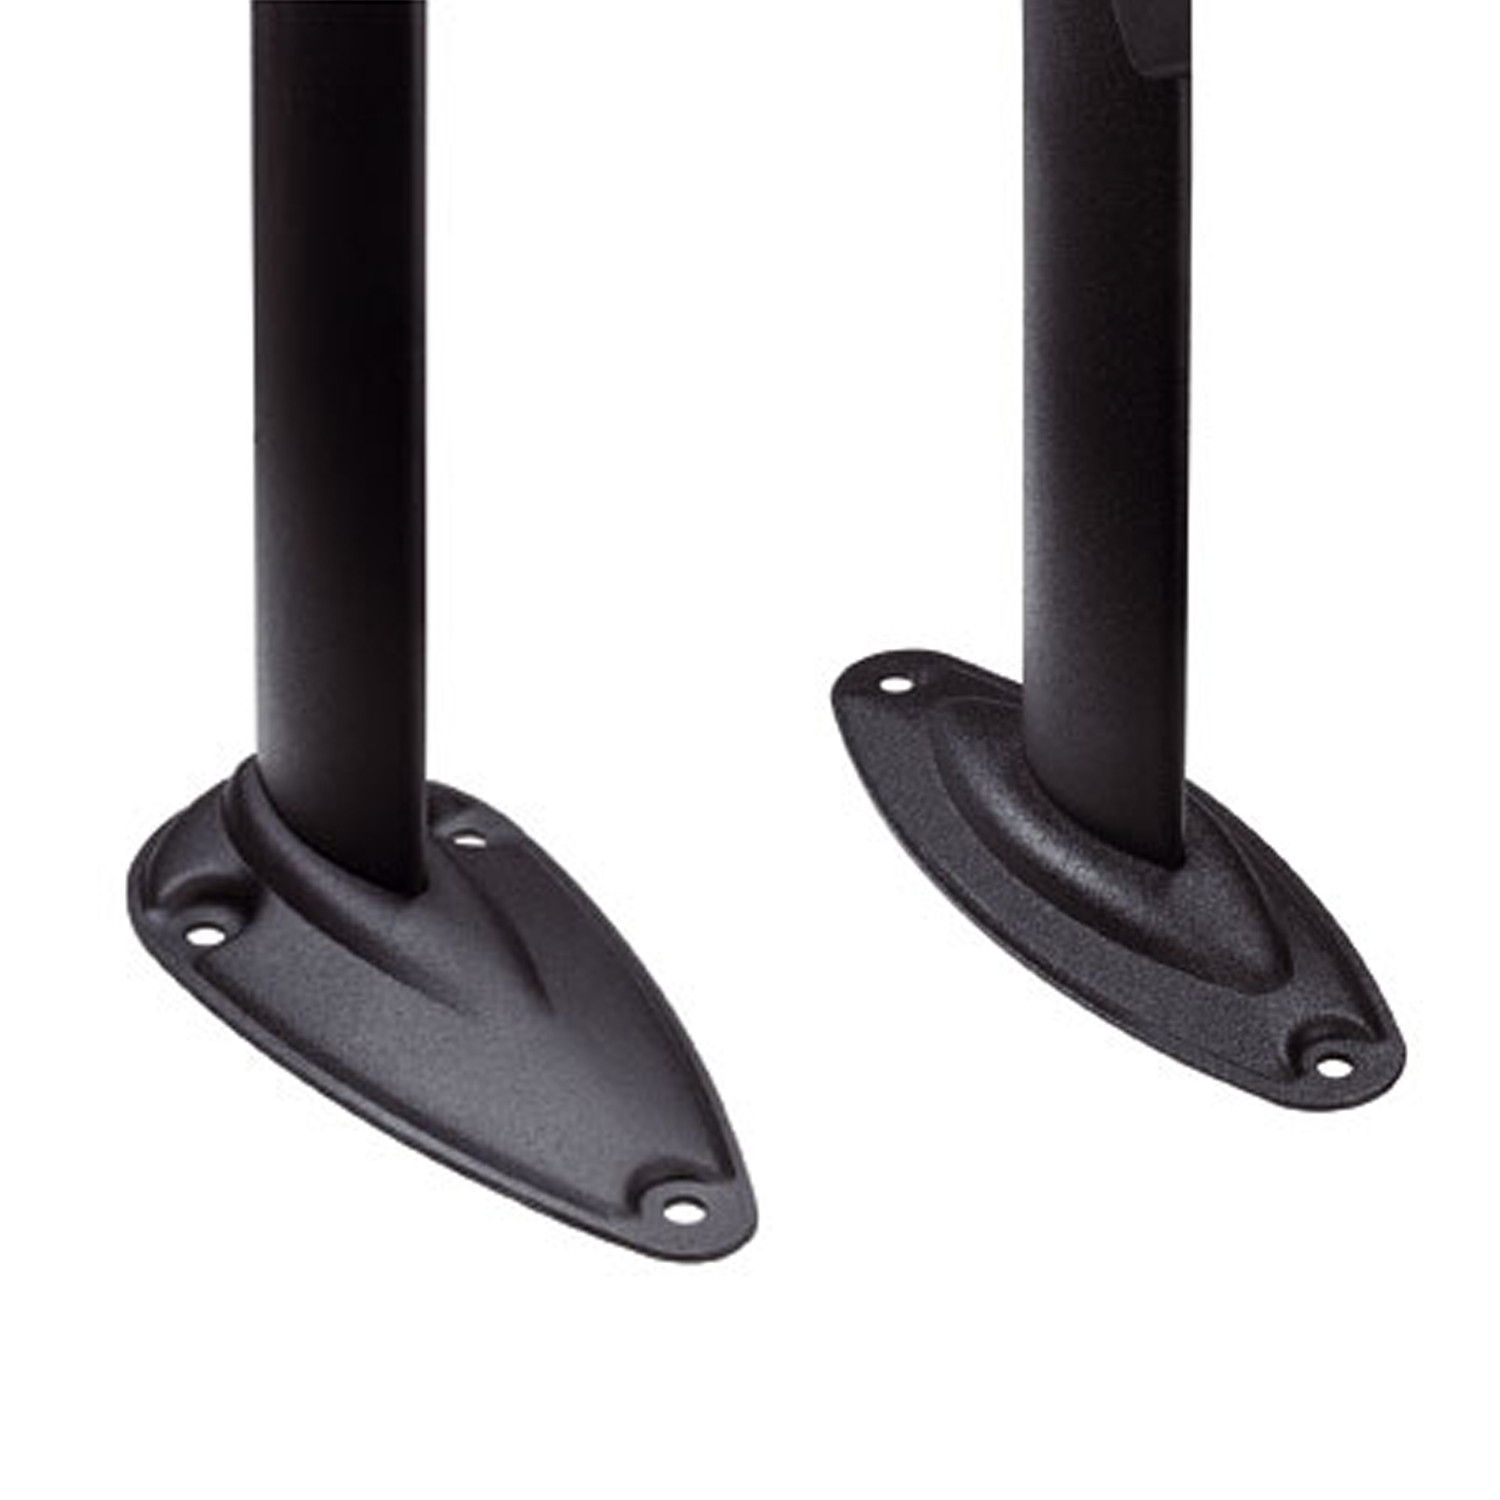 Omnia Auditorium System is available in two foot options